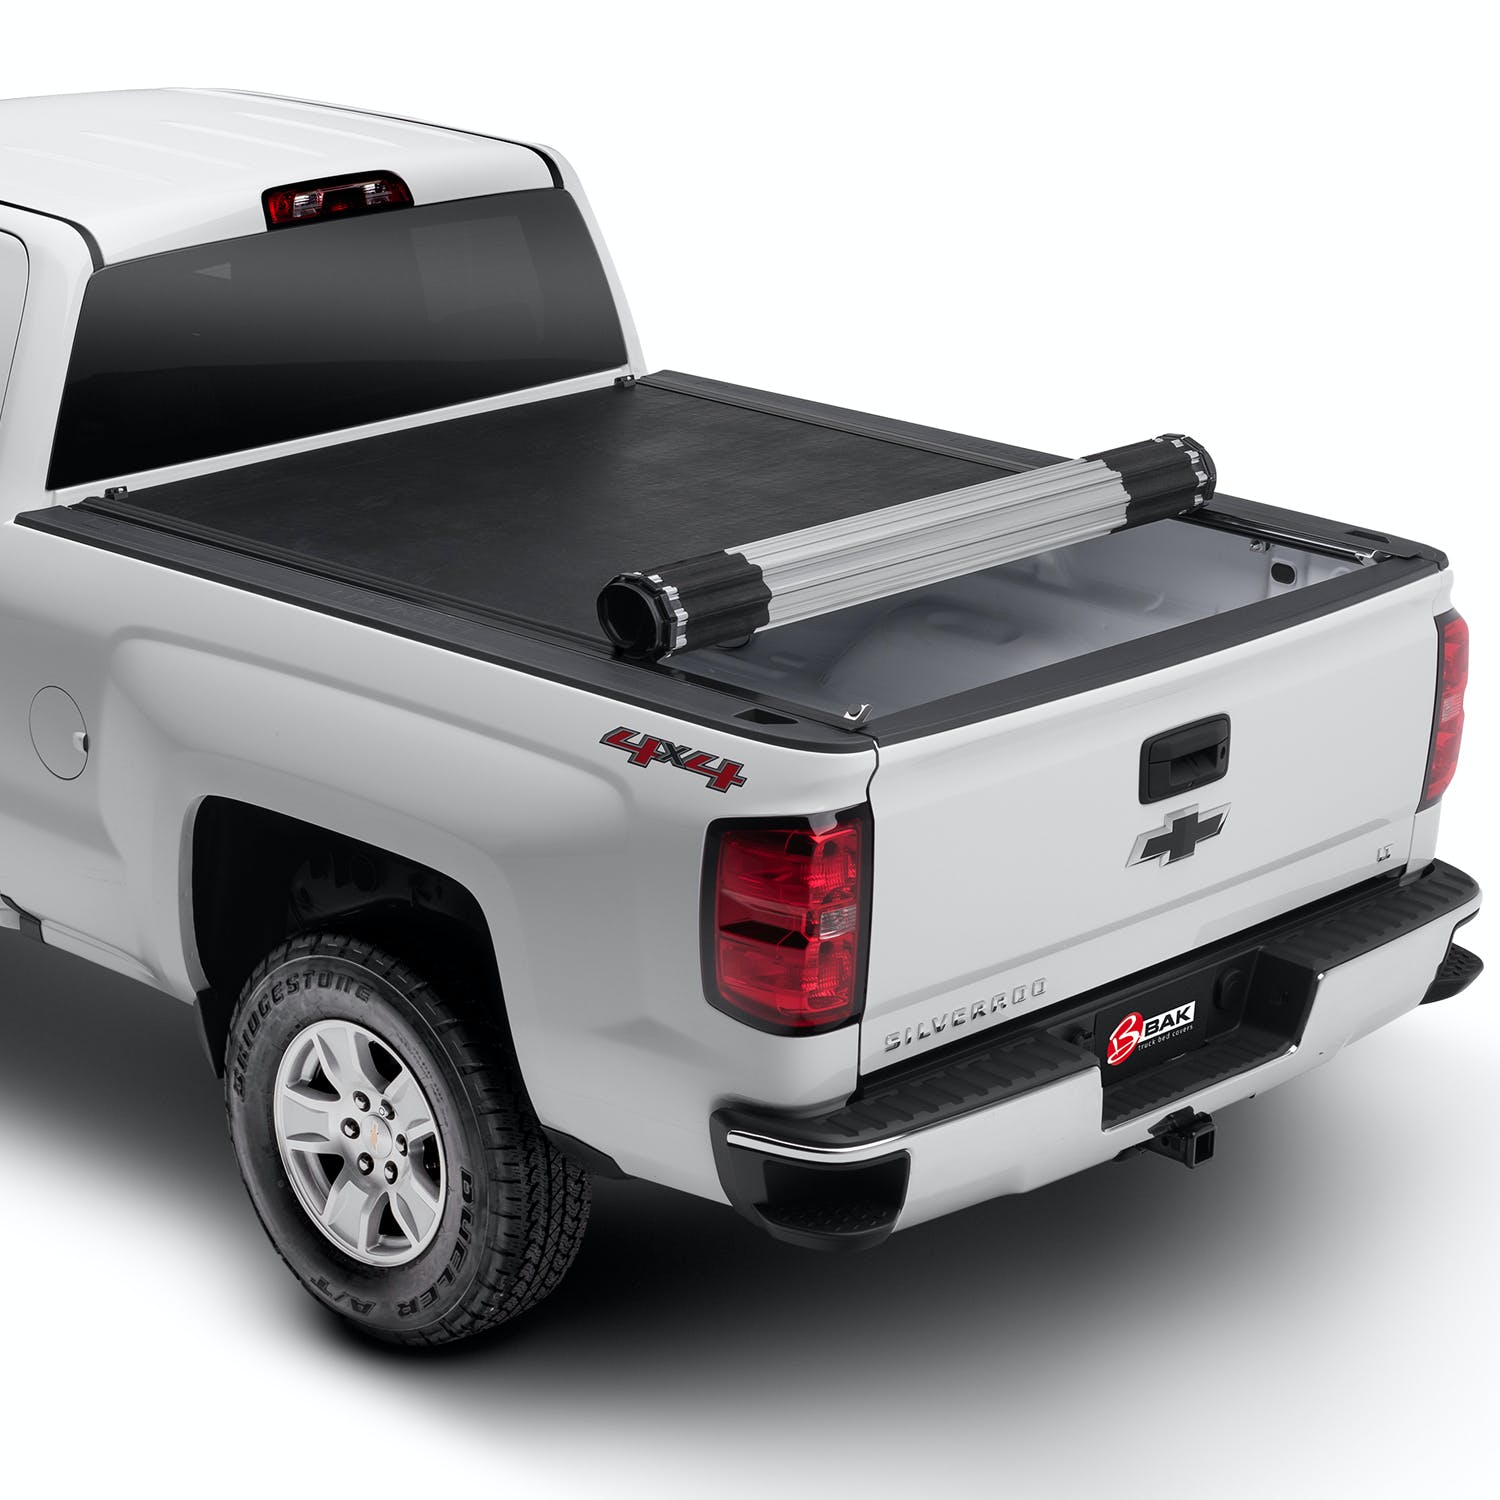 BAK Industries 39328 Revolver X2 Hard Rolling Truck Bed Cover